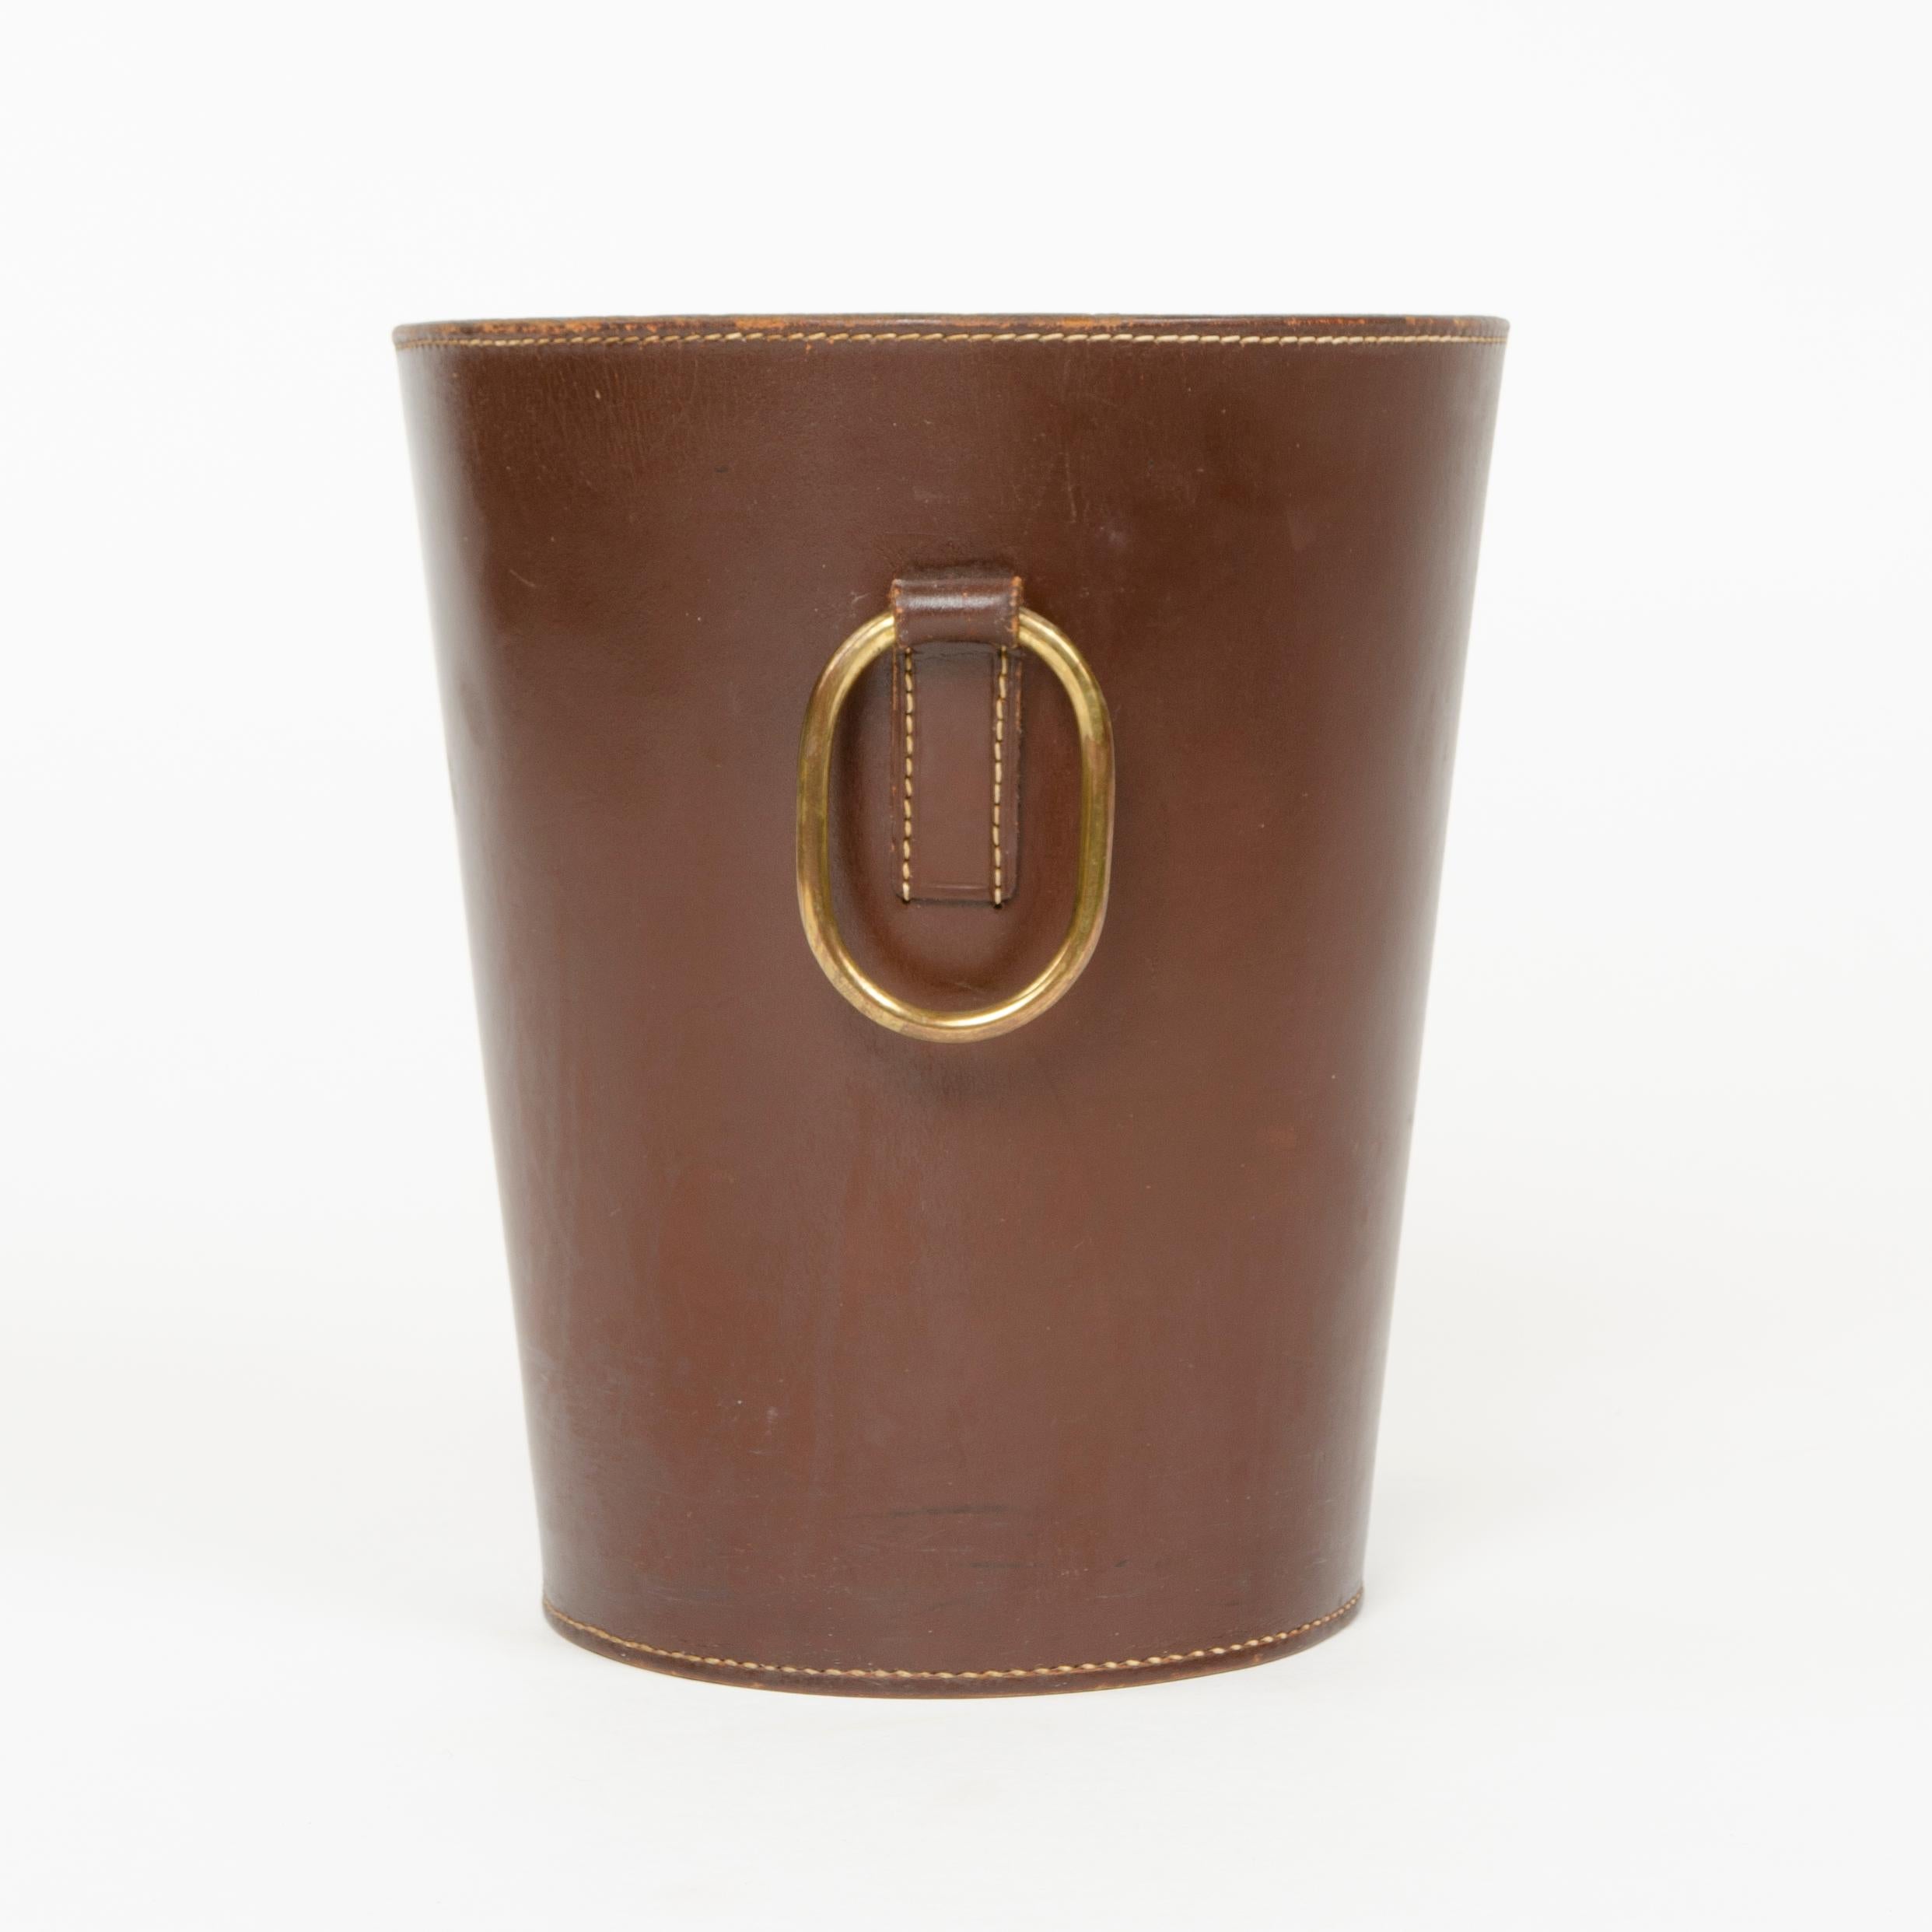 Fine quality leather ‘Paper Basket’ with brass ring handles as sold by Illums Bolighus (Copenhagen) in the early 1950s.